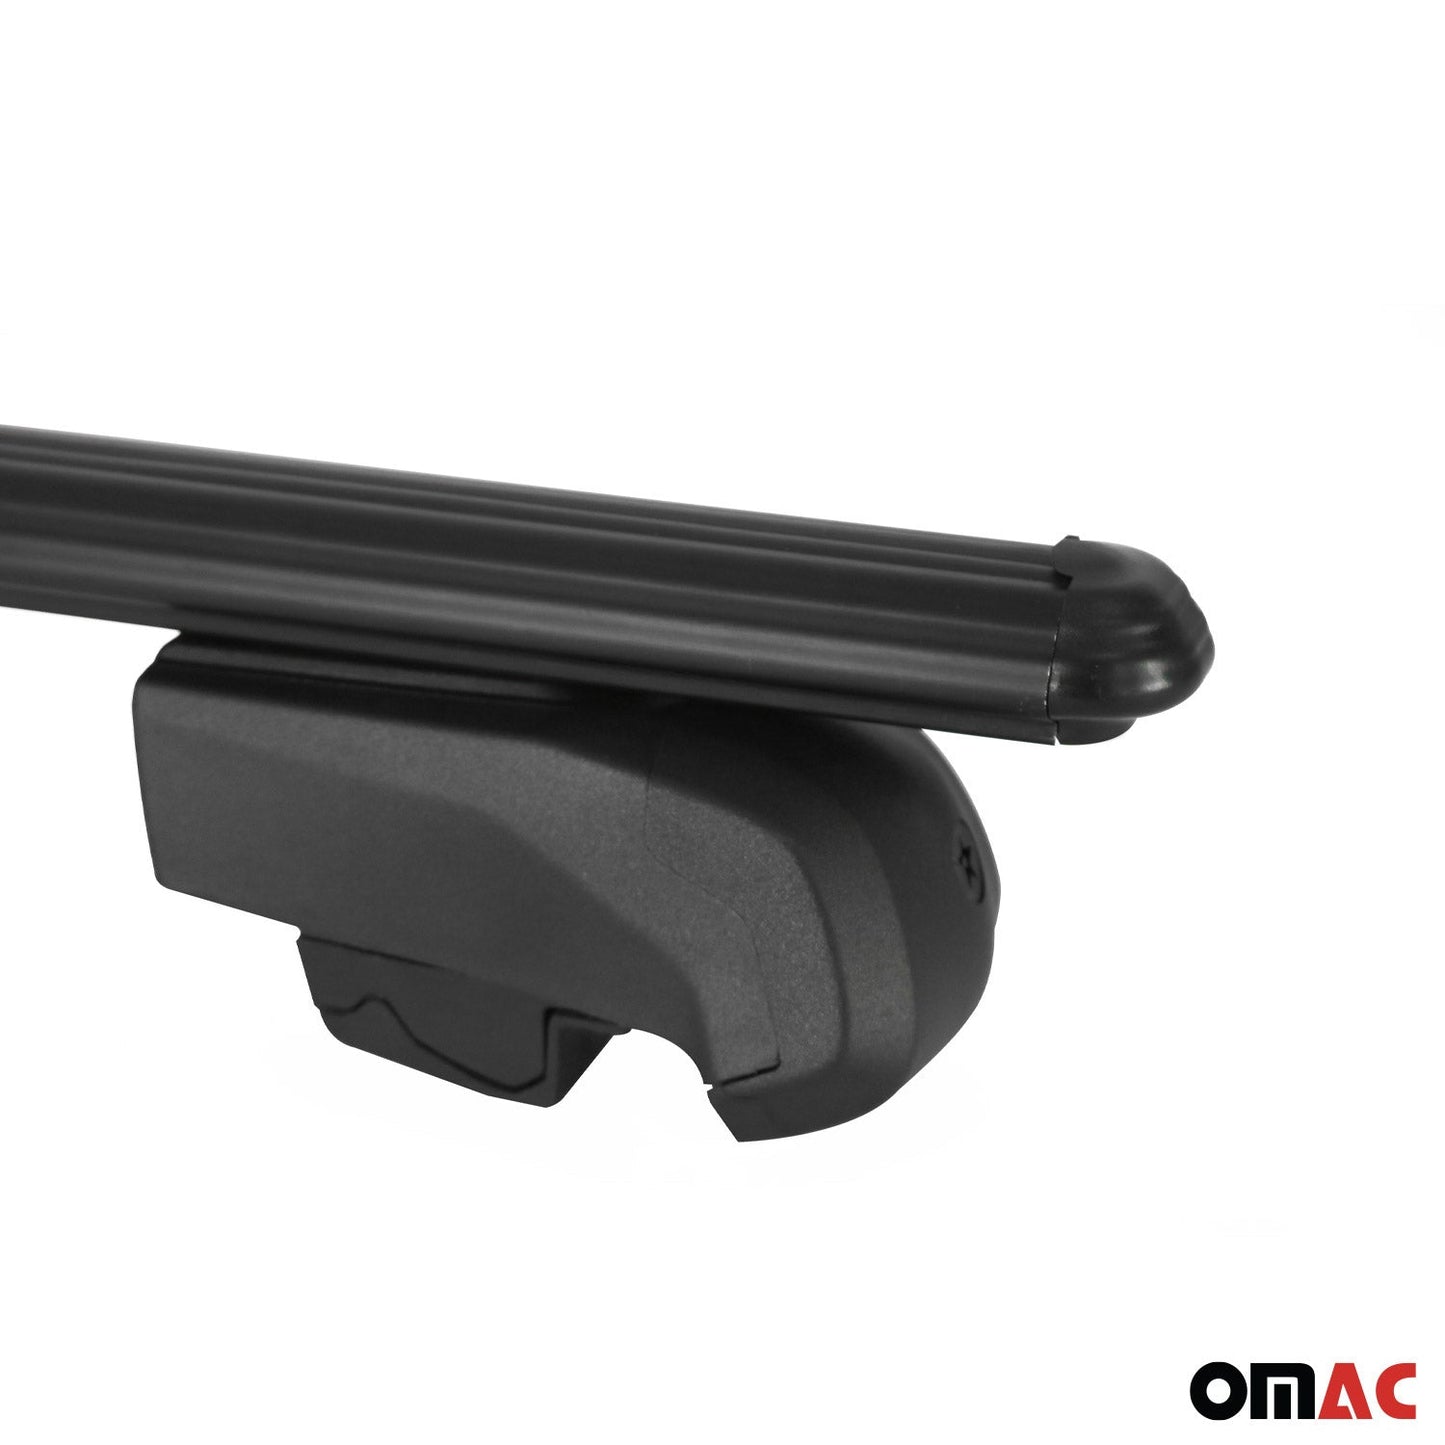 OMAC Lockable Roof Rack Cross Bars Luggage Carrier for Lincoln MKX 2016-2018 Black G003011